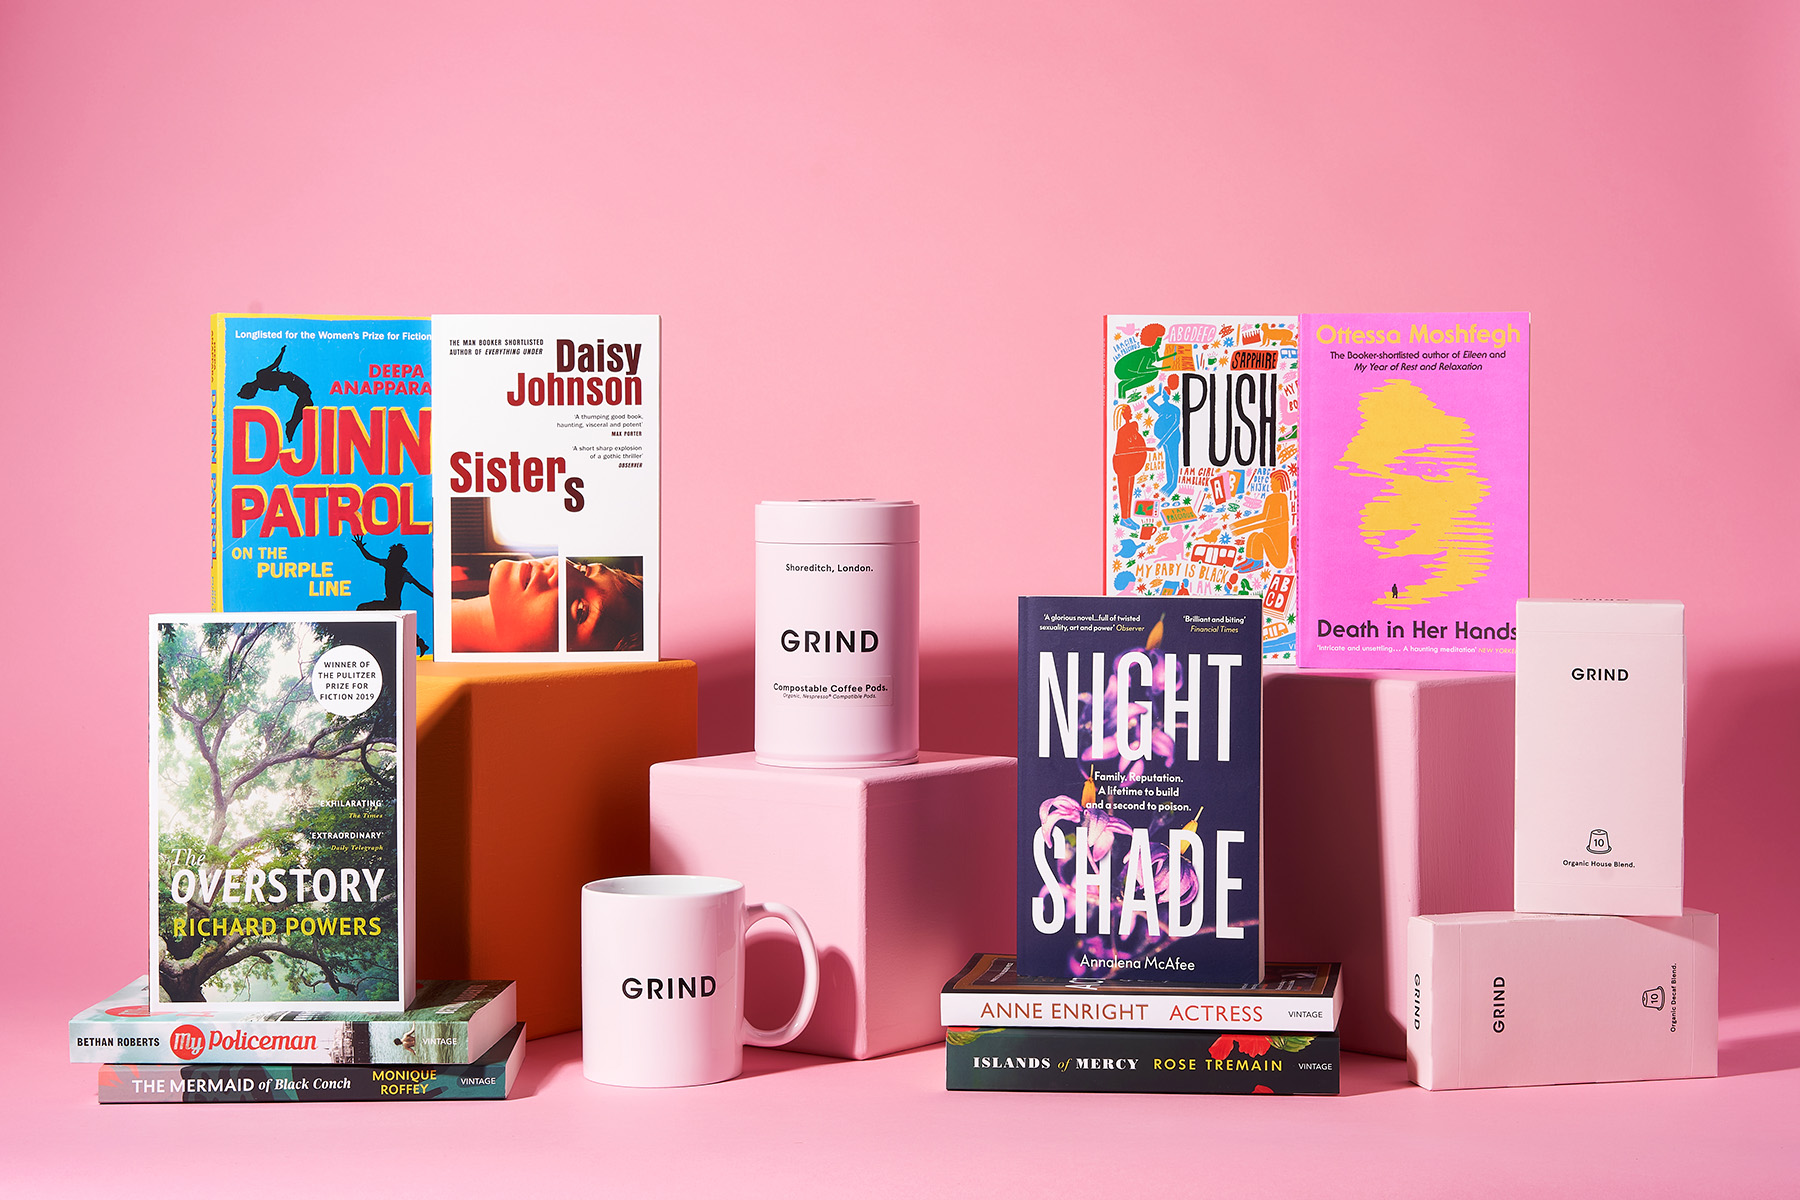 A photograph of 10 paperback books in stacks with Grind coffee tins, boxes and mugs against a pink background